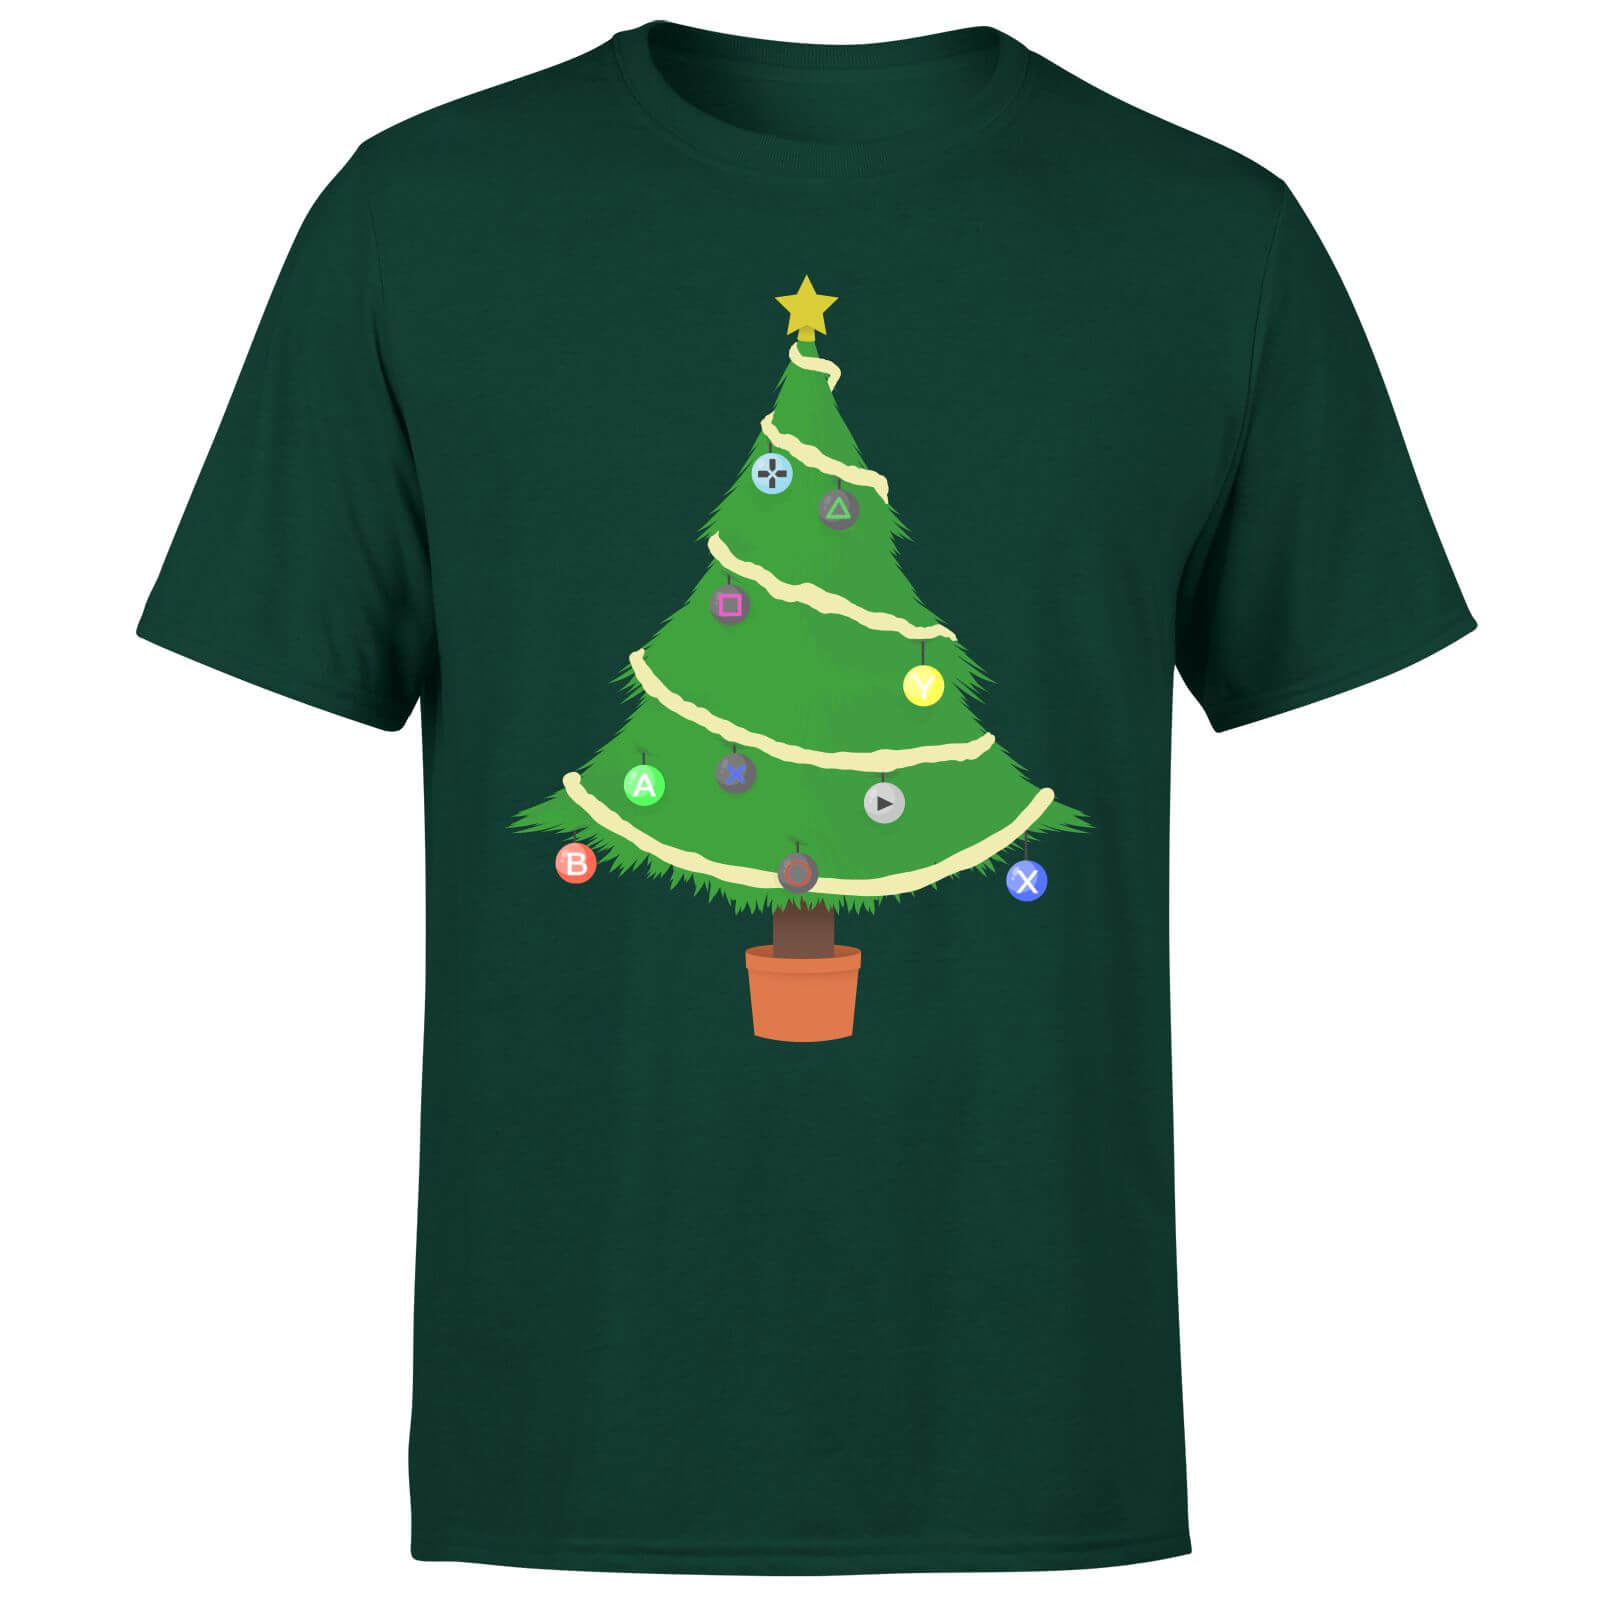 Buttons Tree T-Shirt - Forest Green - S - Forest Green